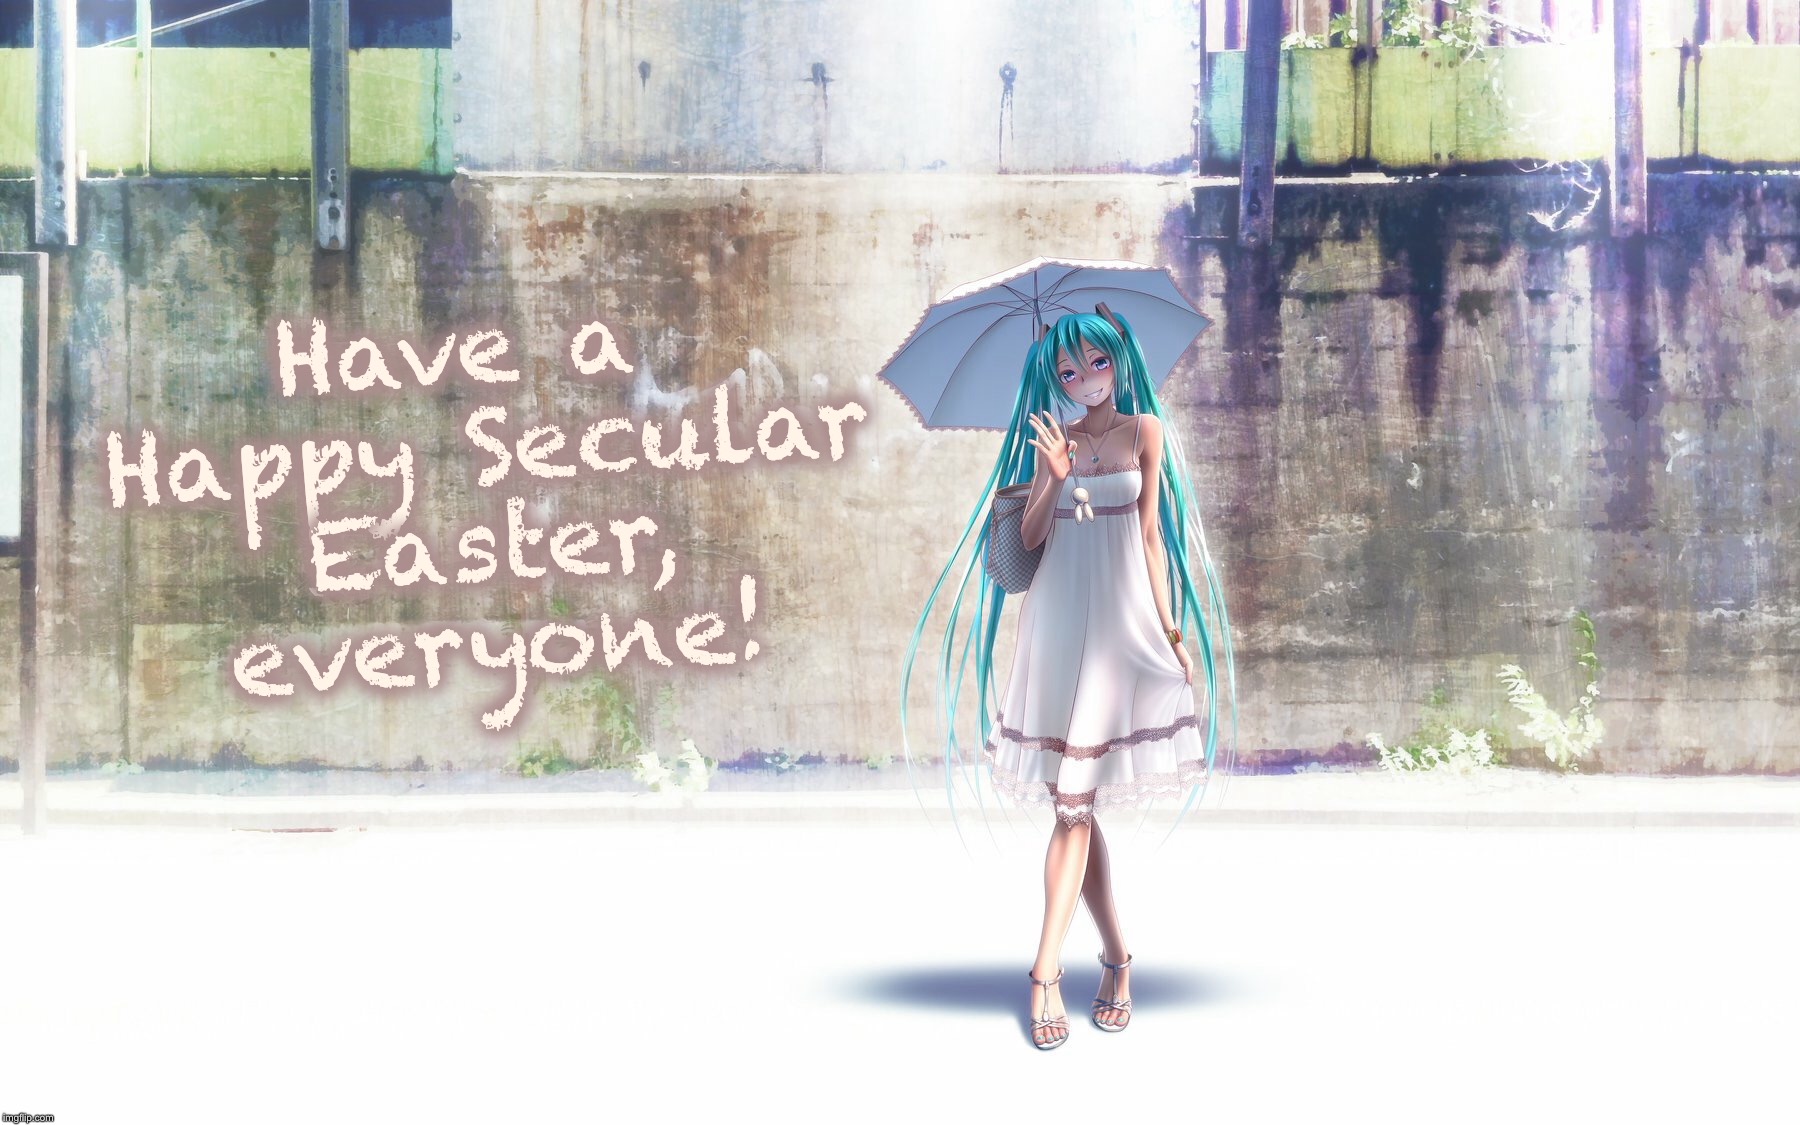 Happy Secular Easter | Have a Happy Secular Easter, everyone! | image tagged in hatsune miku,happy easter,atheist,vocaloid,girl,graffiti | made w/ Imgflip meme maker